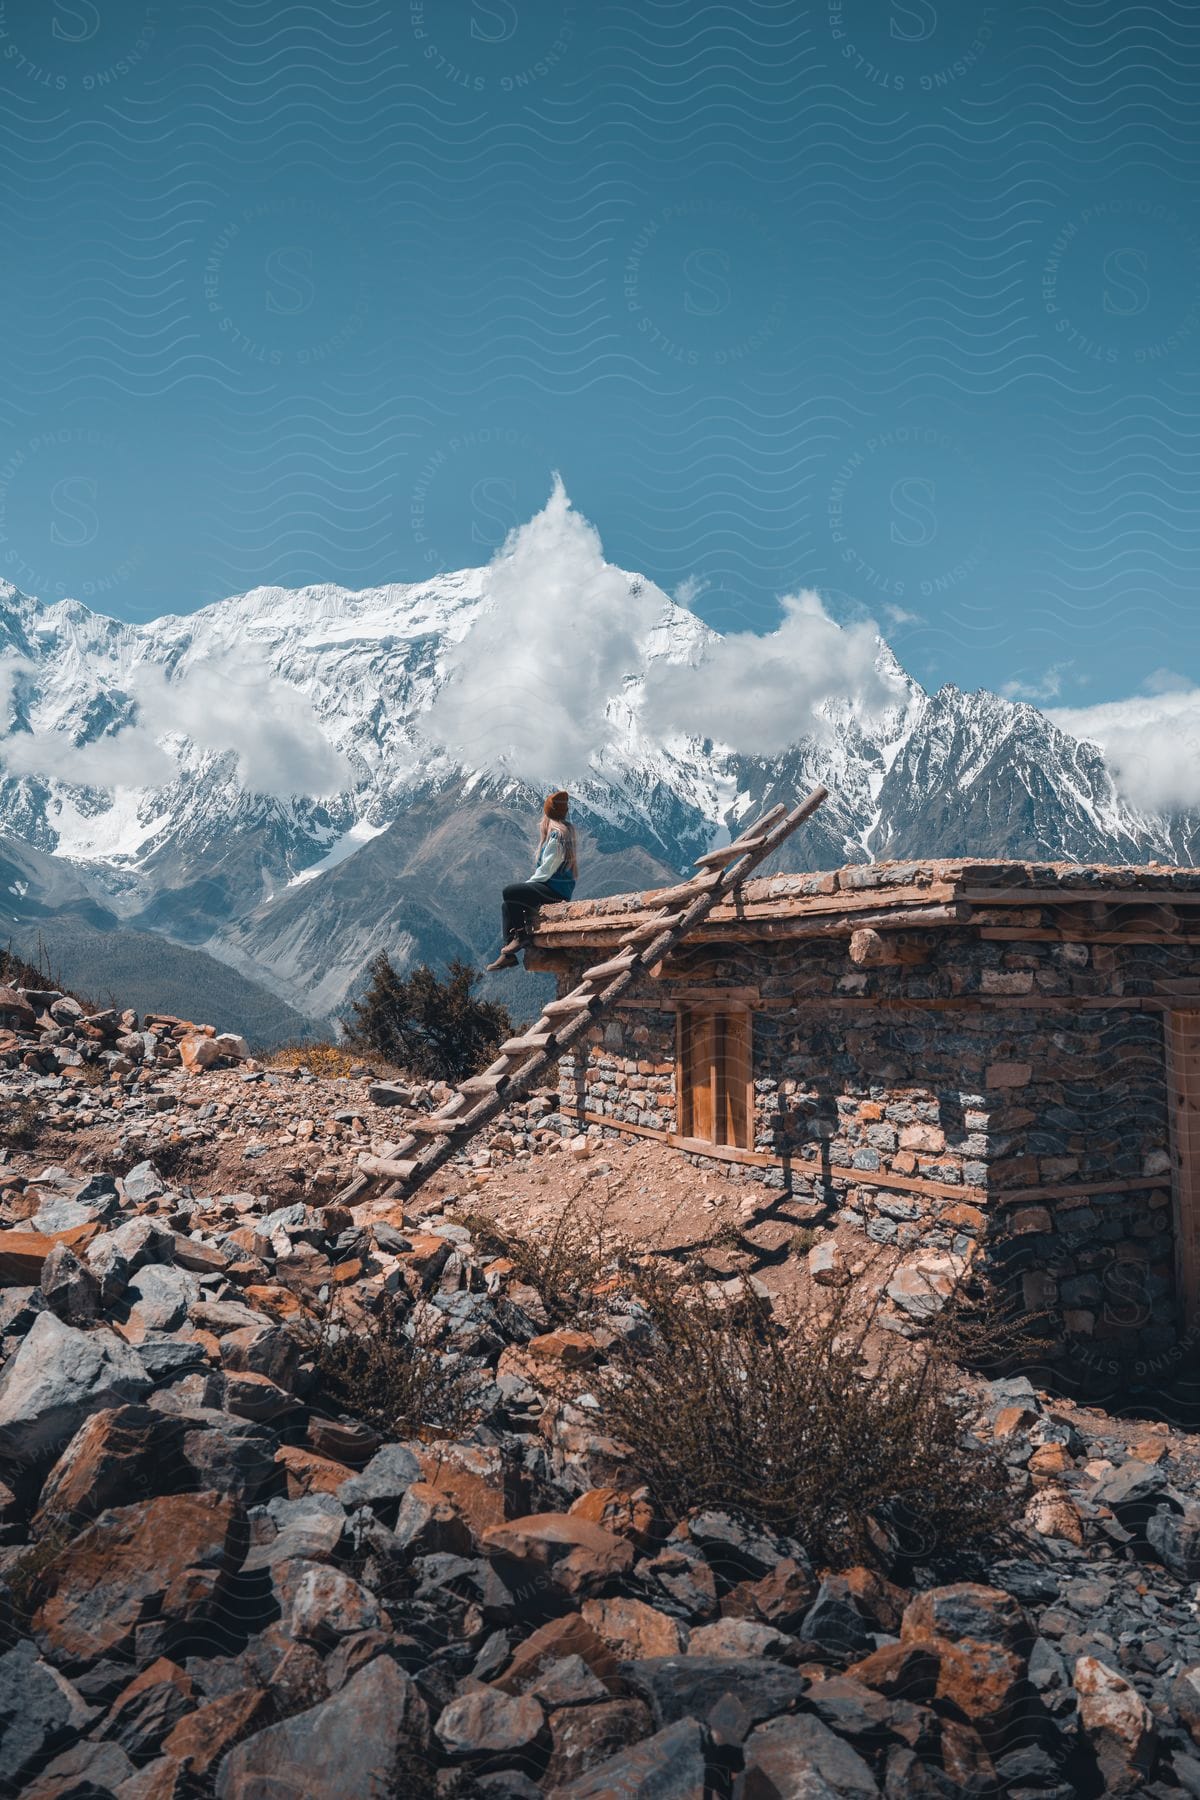 A woman sitting on the roof of a stone building with a backdrop of snowy mountain peaks and clouds.